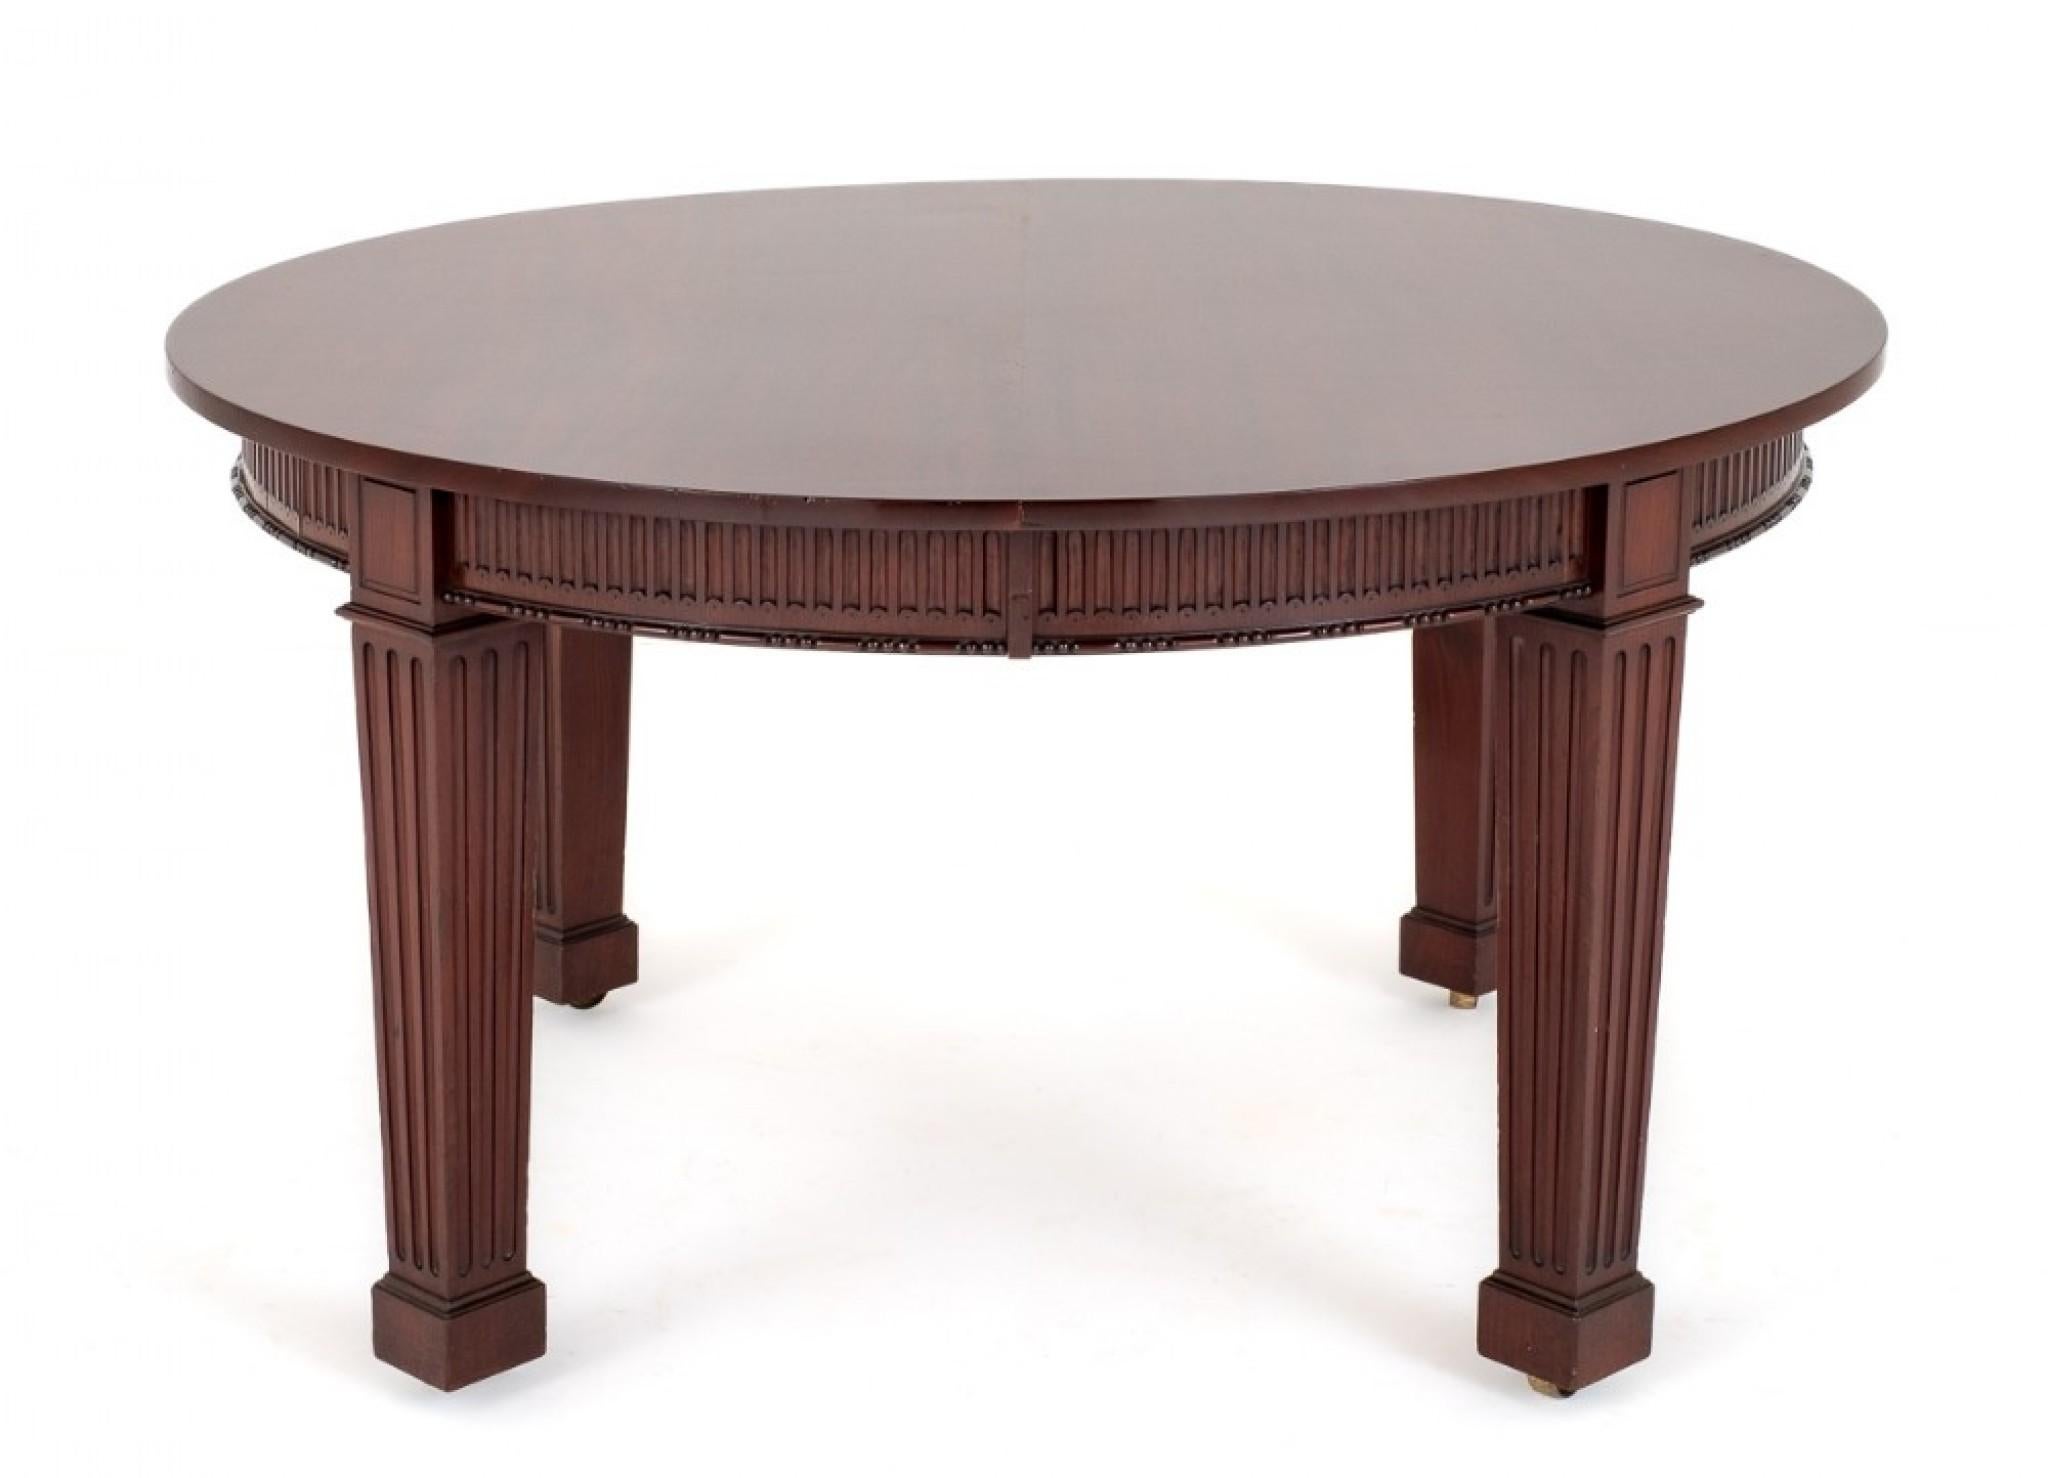 Period Victorian Dining Table Extending Mahogany 2 Leaf 1